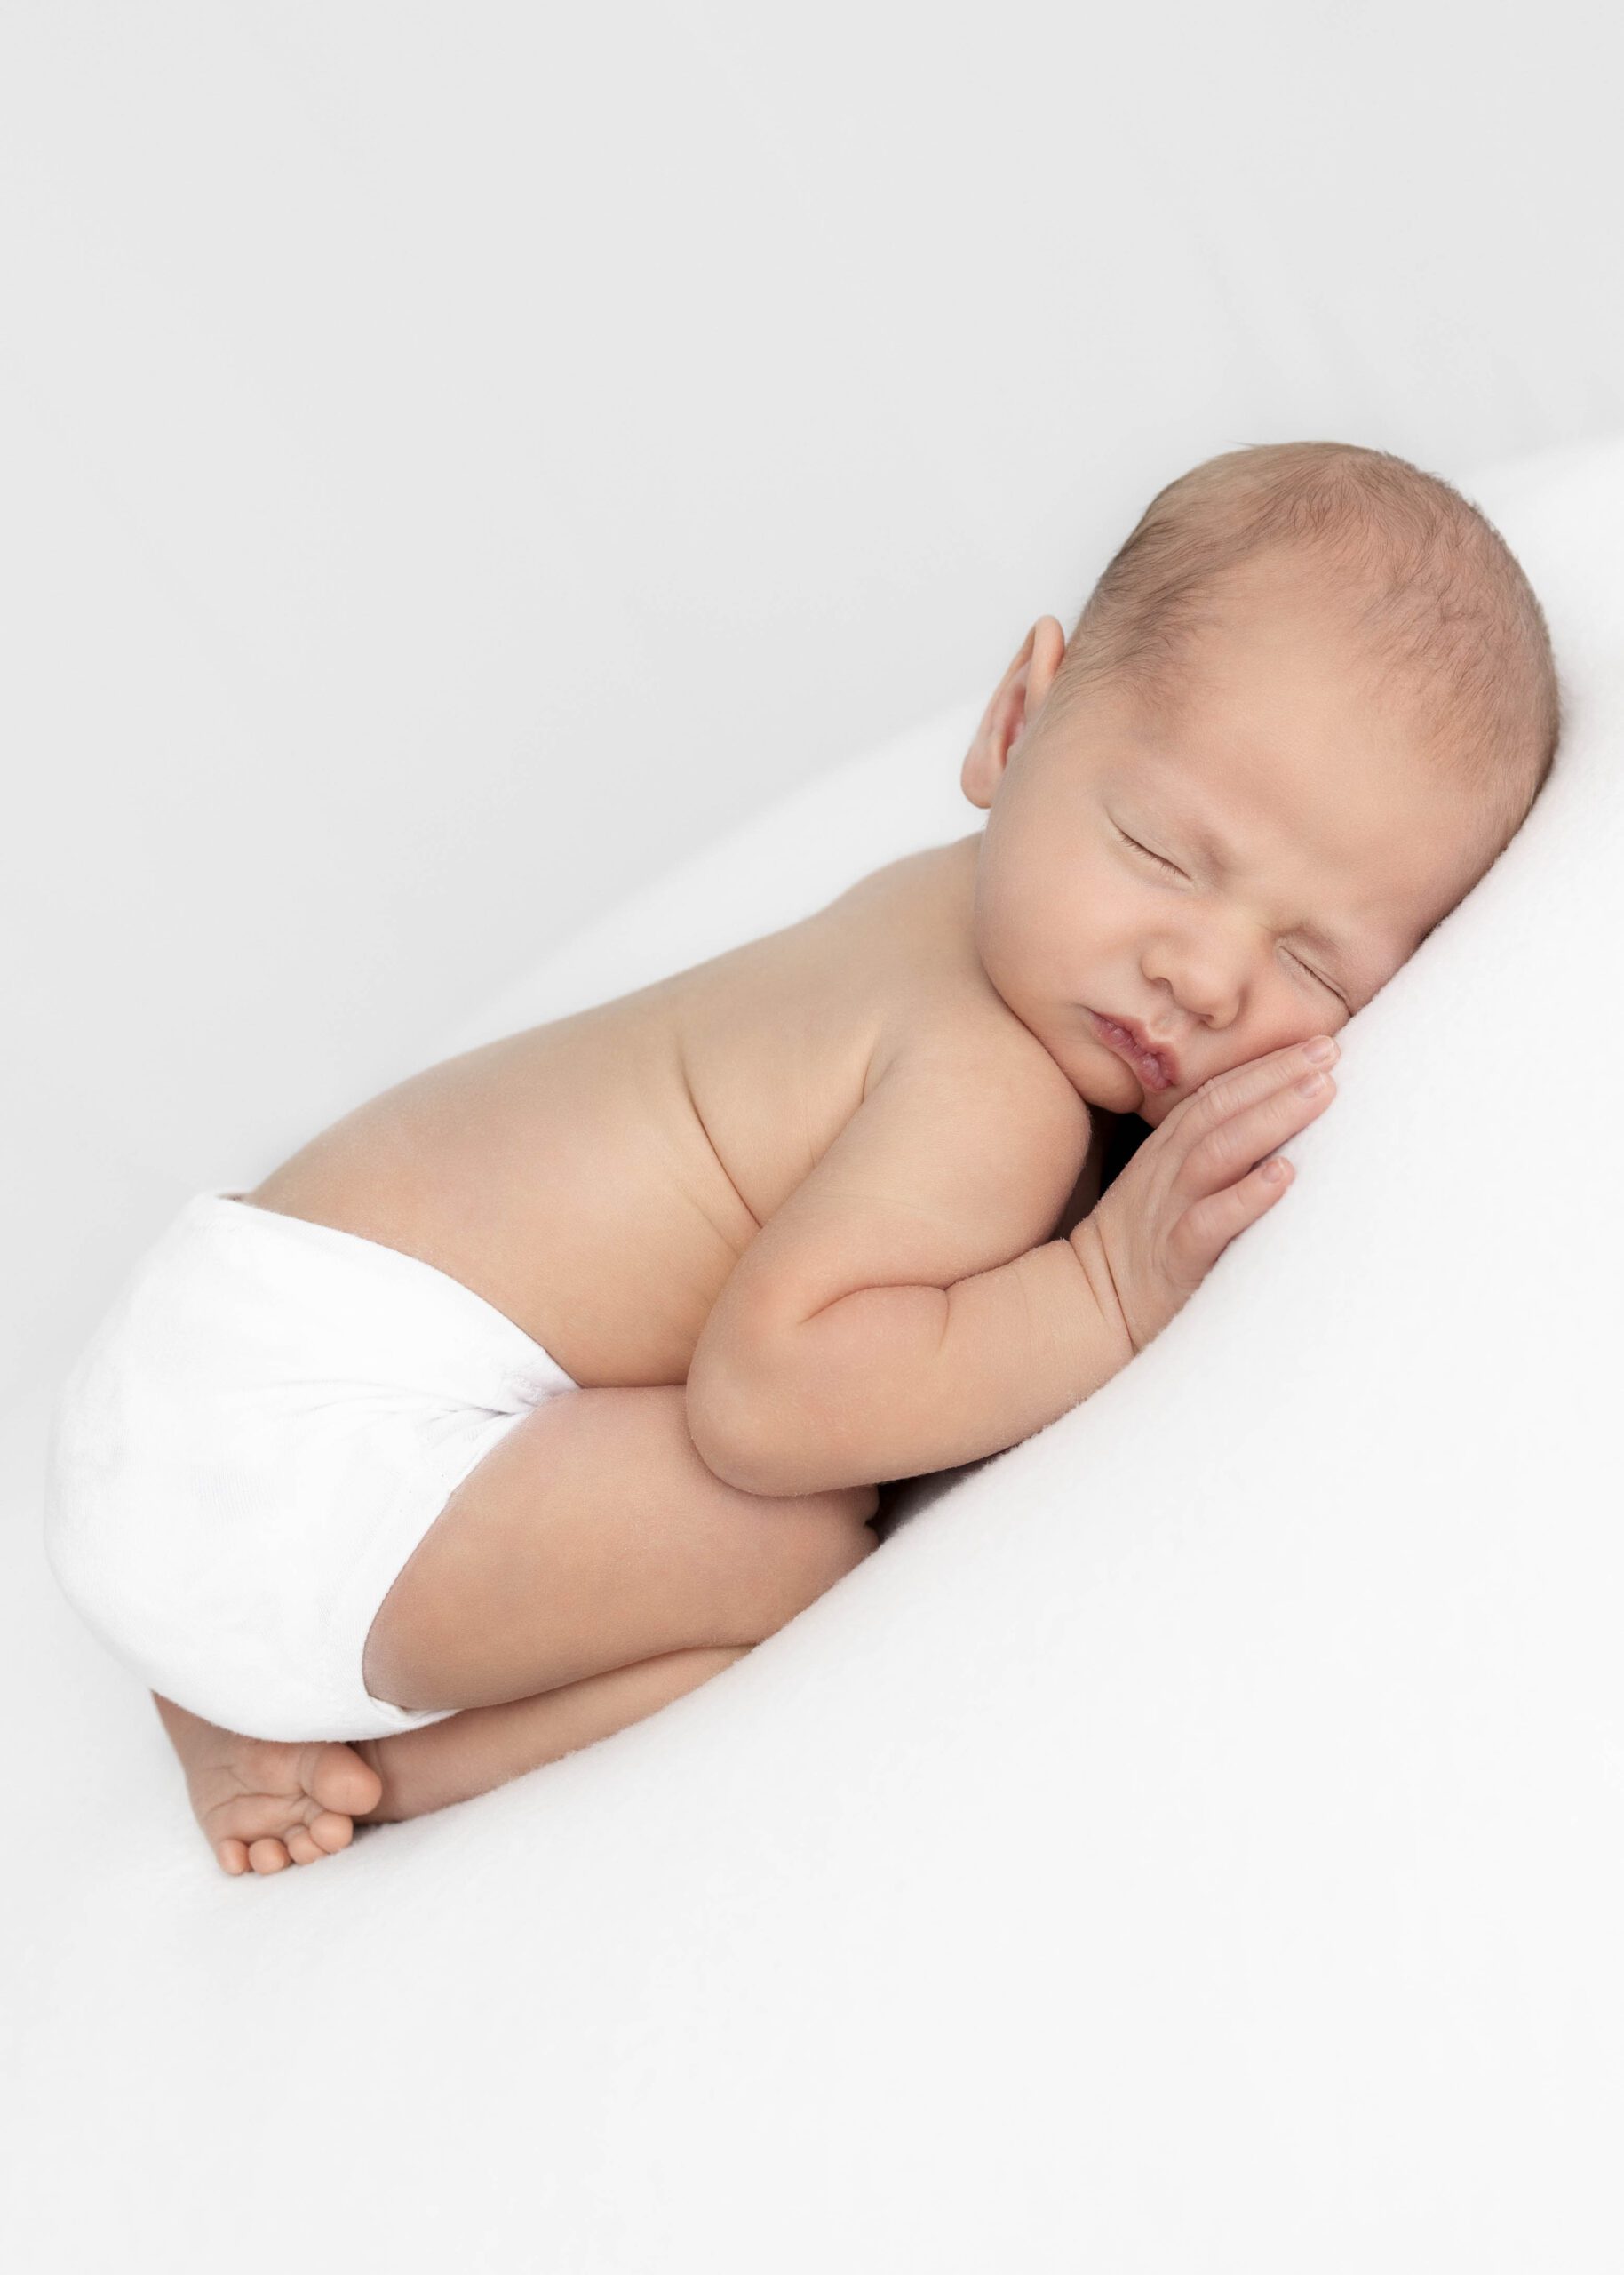 Newborn baby sleeping on belly with legs tucked up